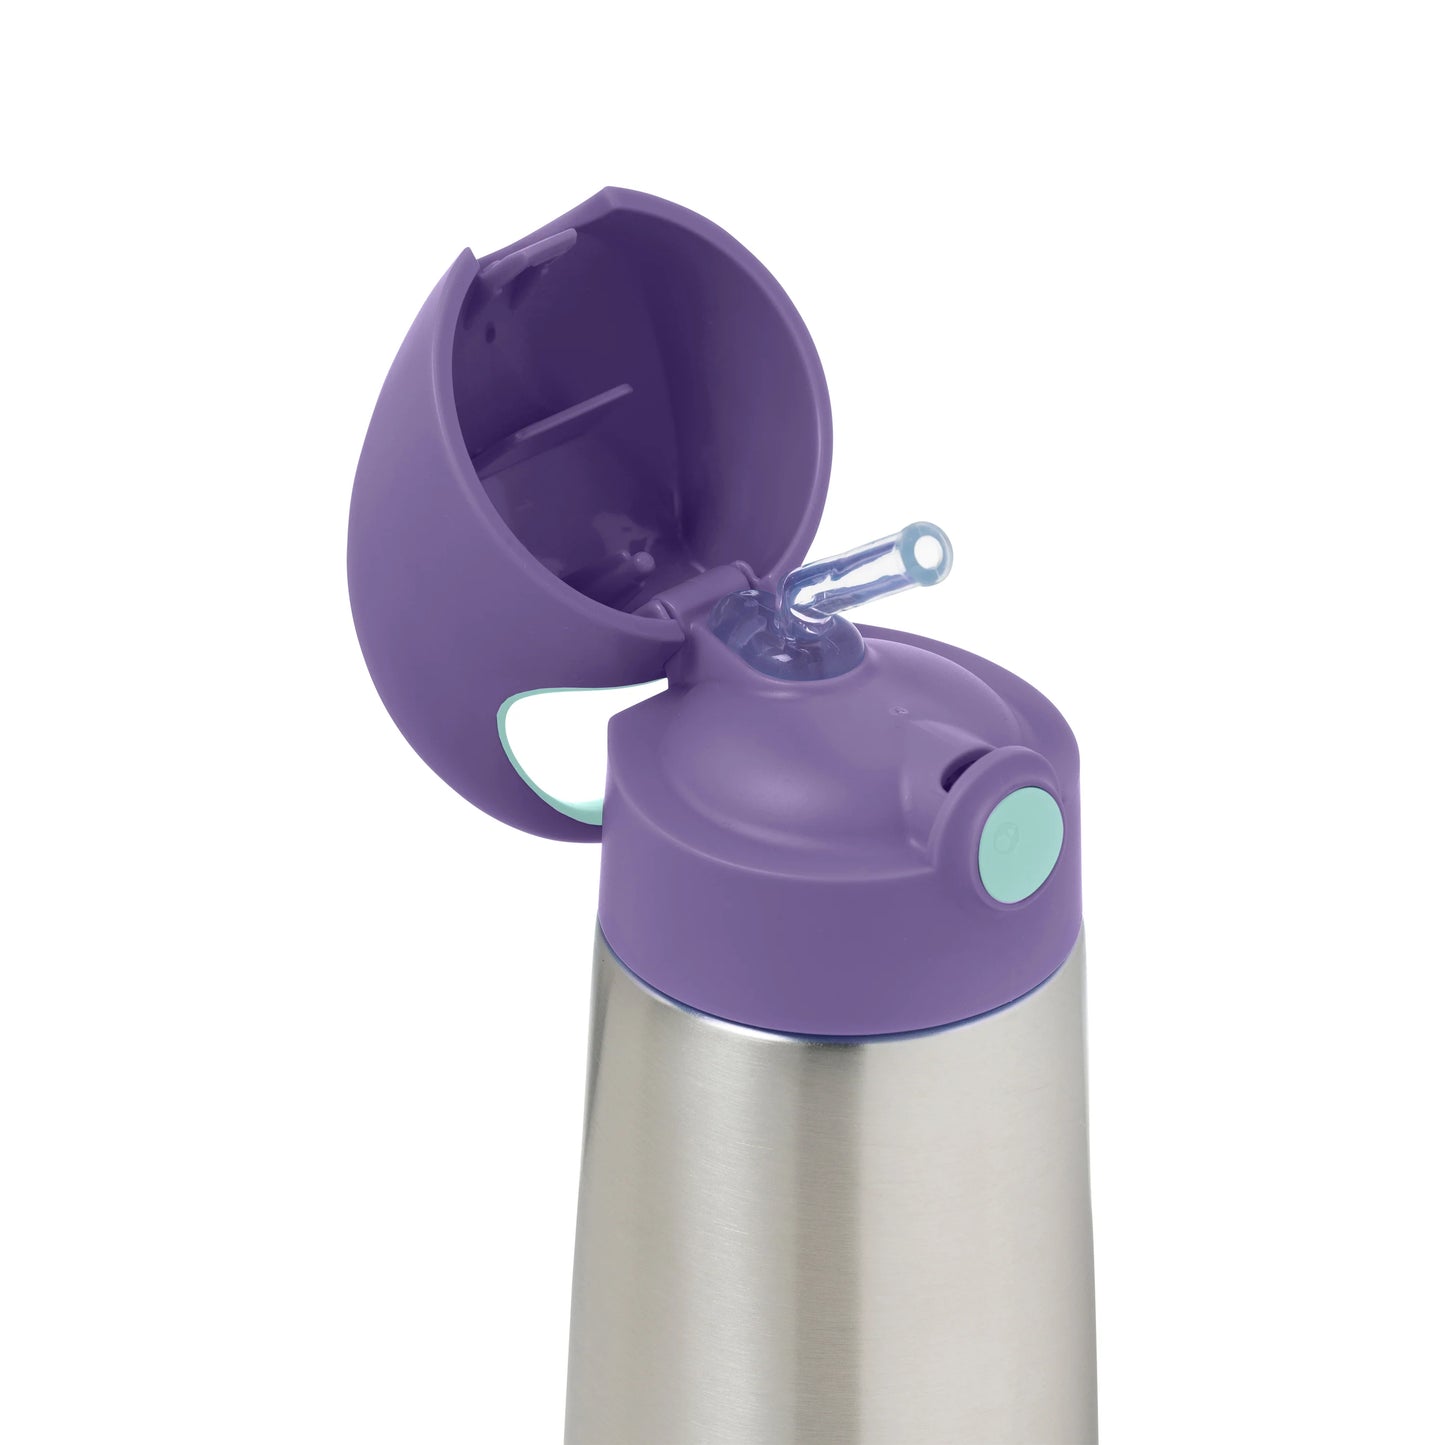 500ML INSULATED DRINK BOTTLE - LILAC POP